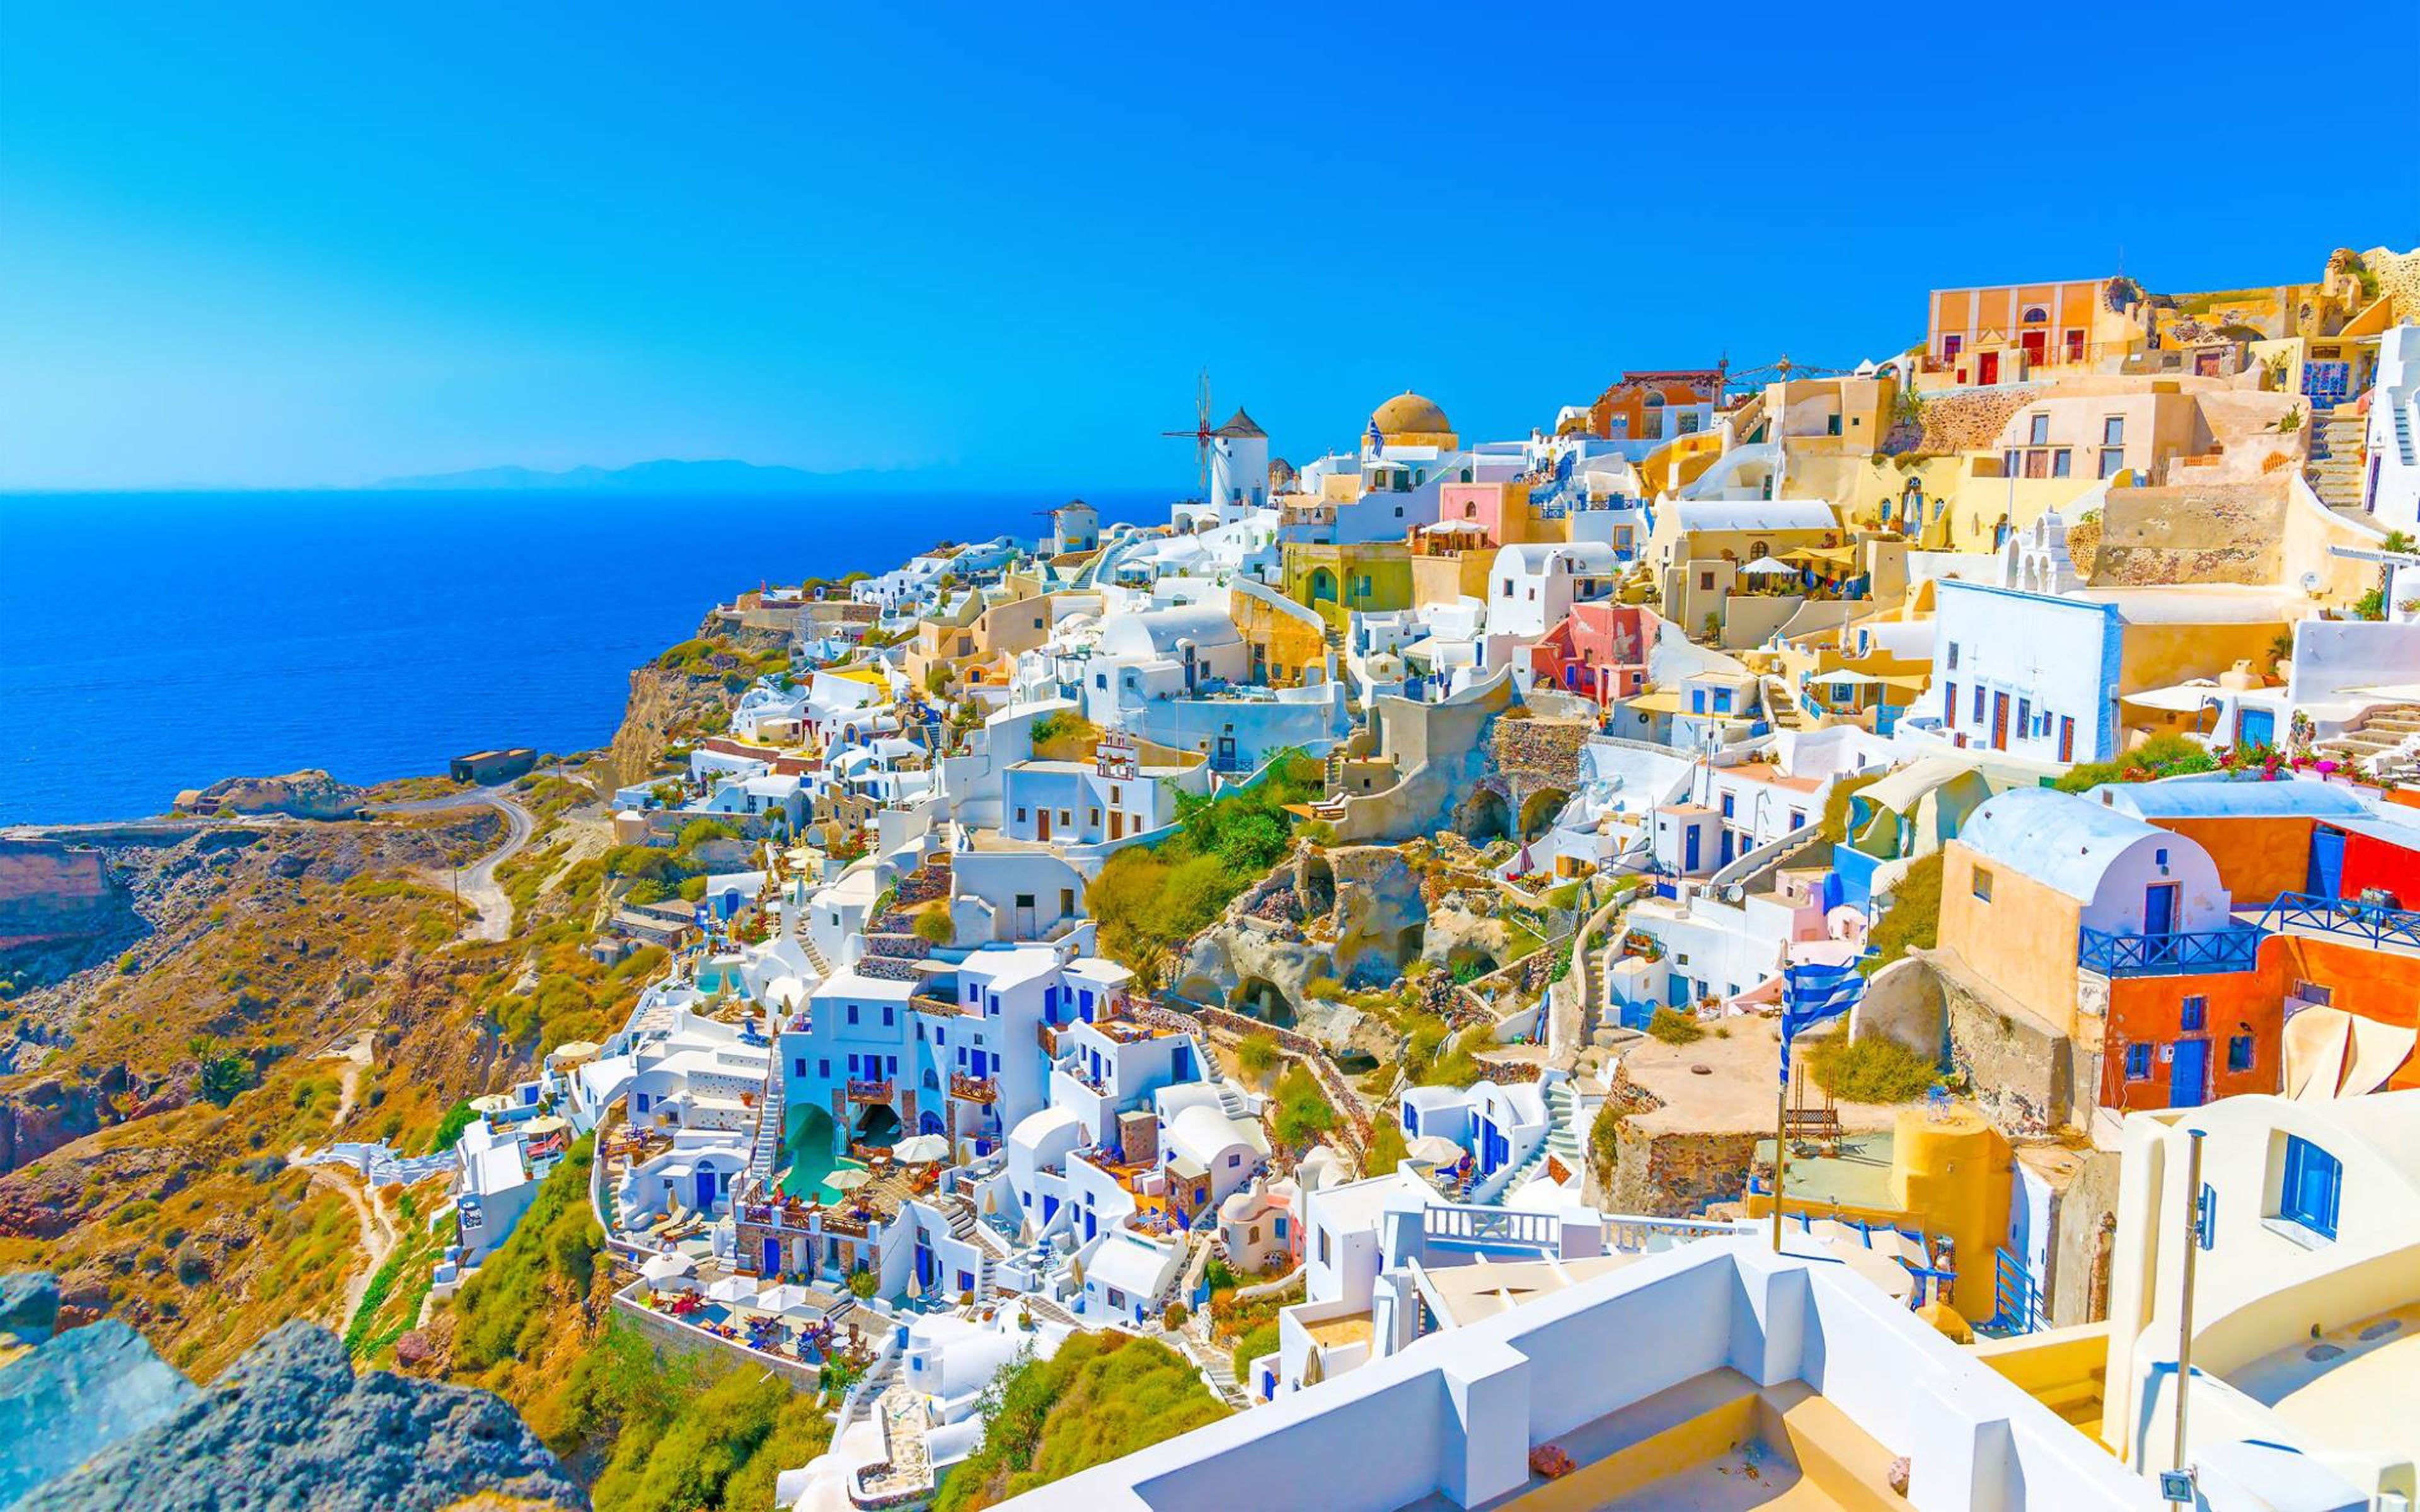 aegean-sea-santorini-island-greece--capitals-fira-i-oya-place-of-one-of-the-largest-volcanic-eruptions-in-the-world--wallpaper.jpg (1.19 MB)